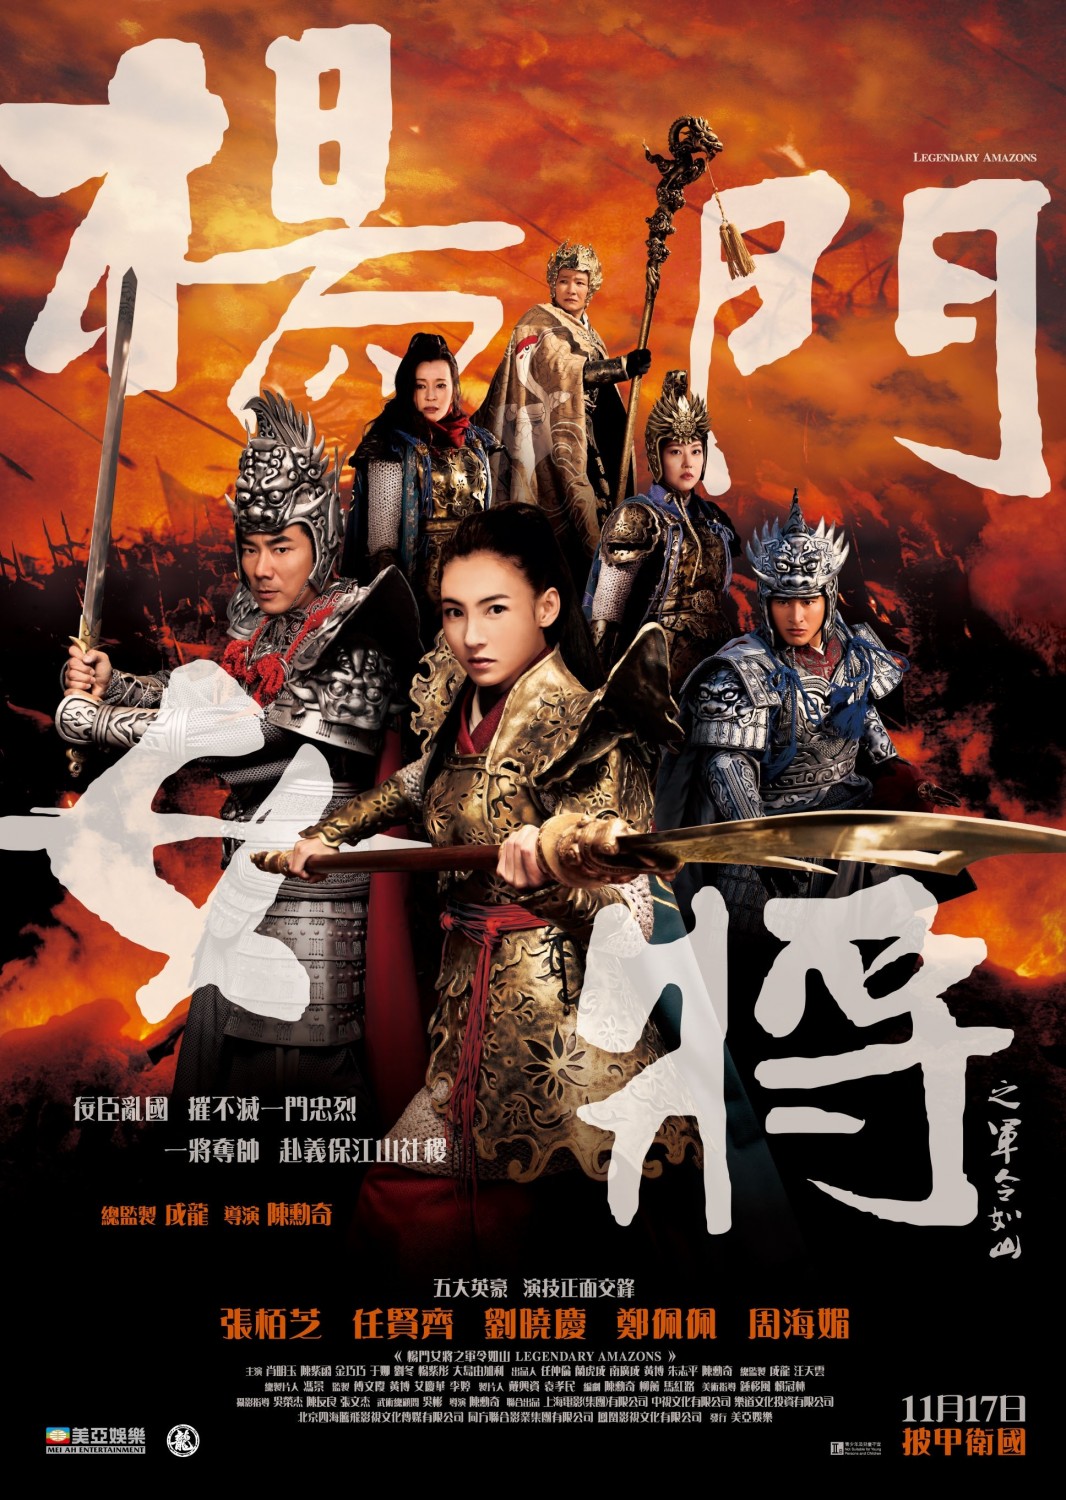 Extra Large Movie Poster Image for Legendary Amazons (#6 of 7)